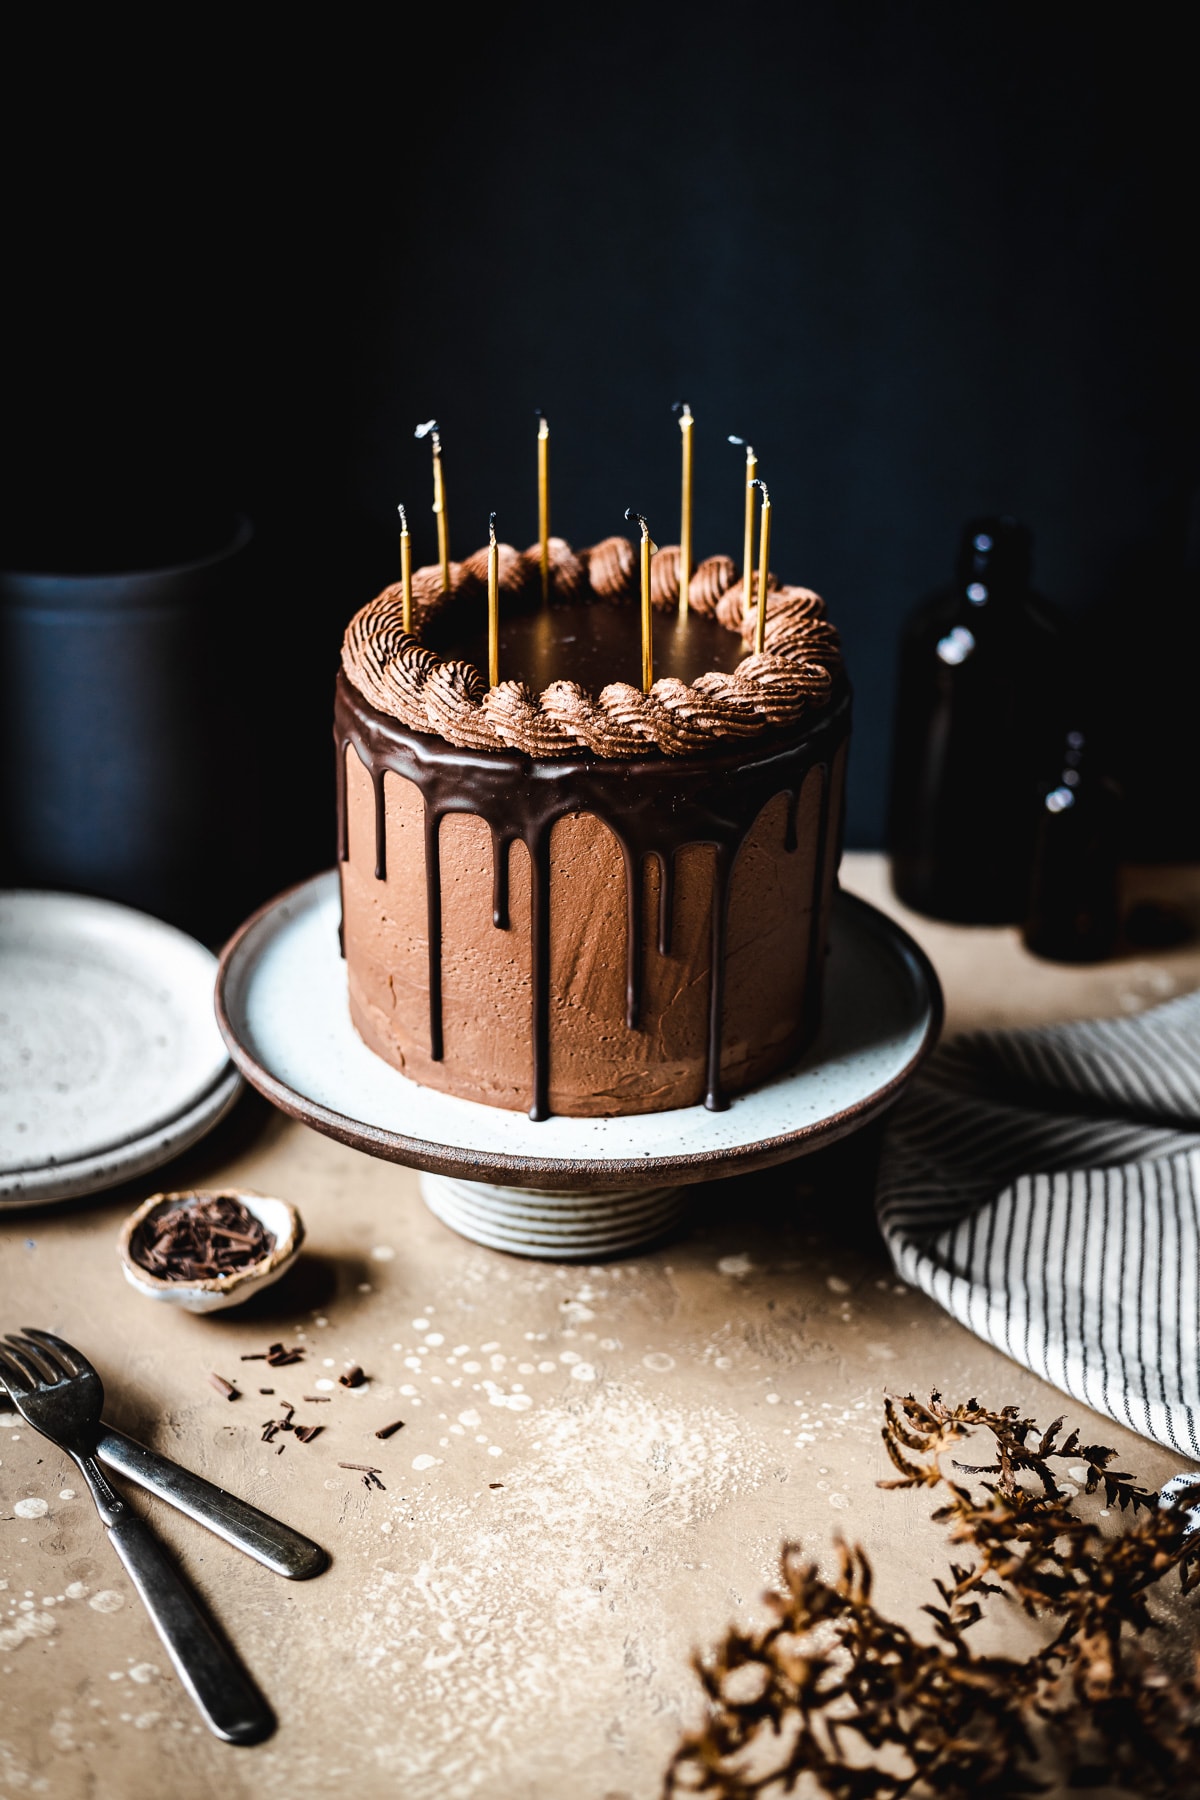 A moody image of a drip cake on a ceramic cake stand on a tan stone surface. There are candles on the cake. Plates, a napkin, and forks rest nearby. The background is black.